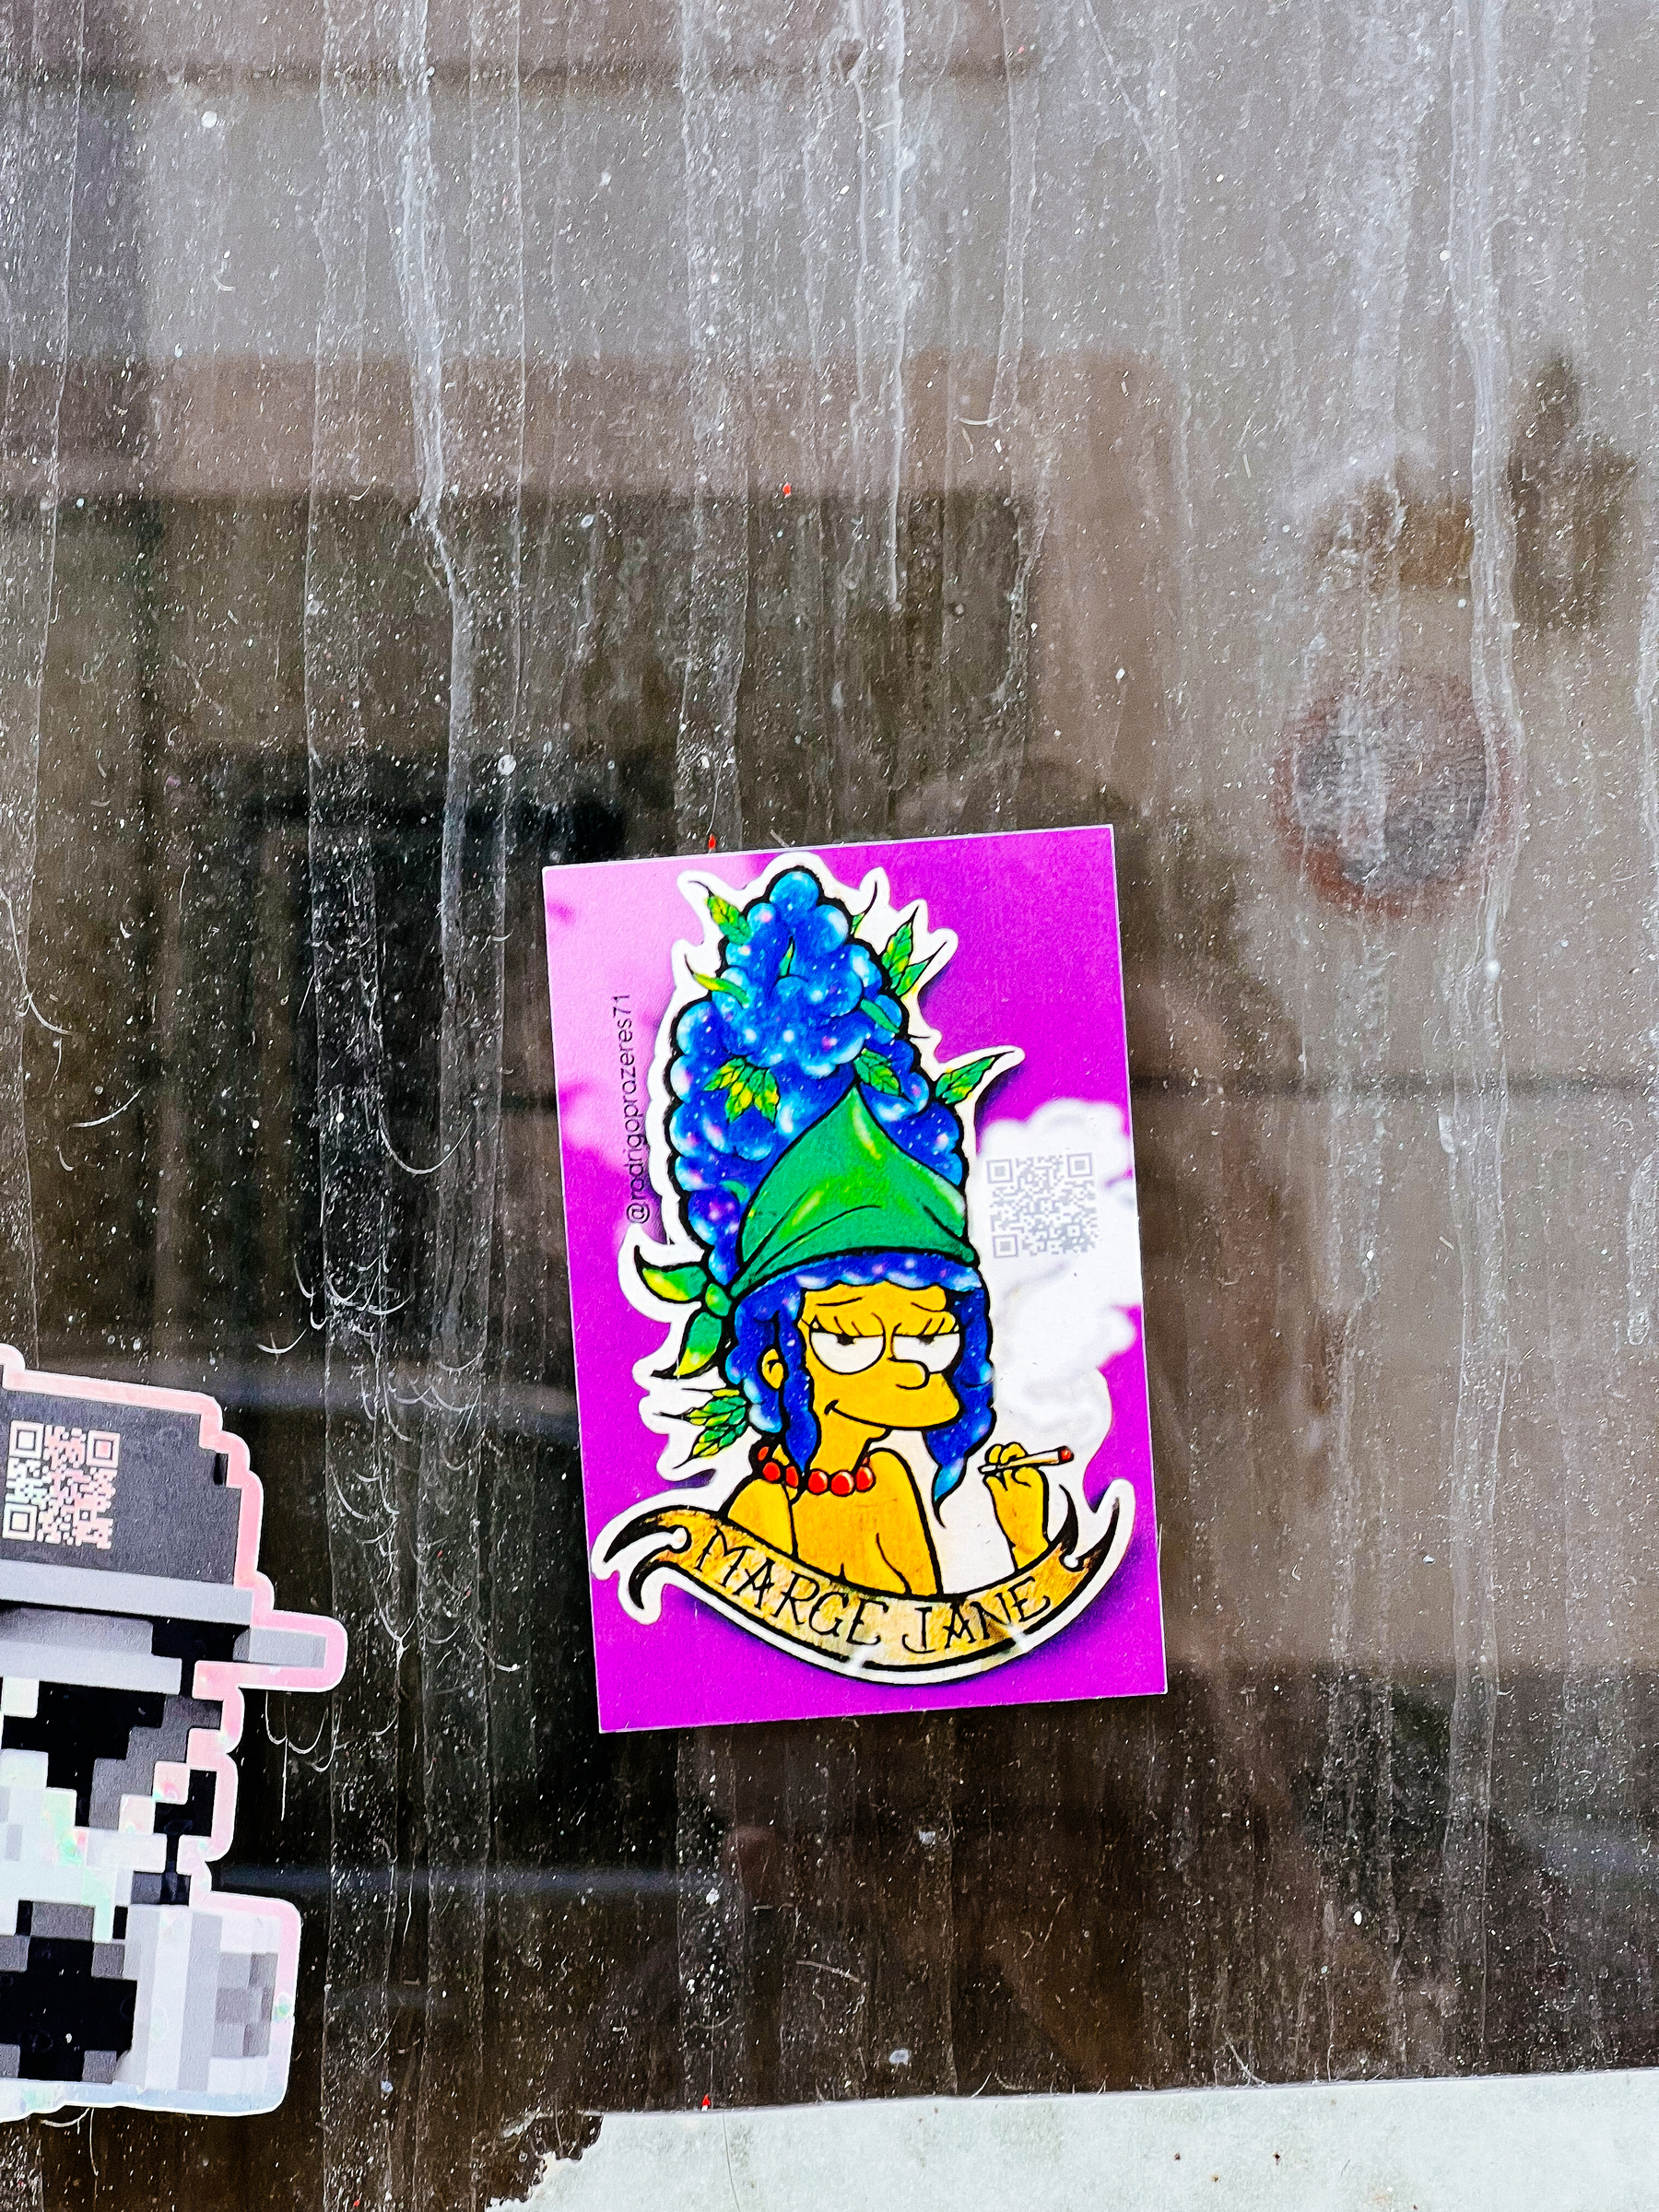 Marge, from The Simpsons, smoking a joint. Weed leaves coming out of her air. ”Marge Jane”. Sticker. 